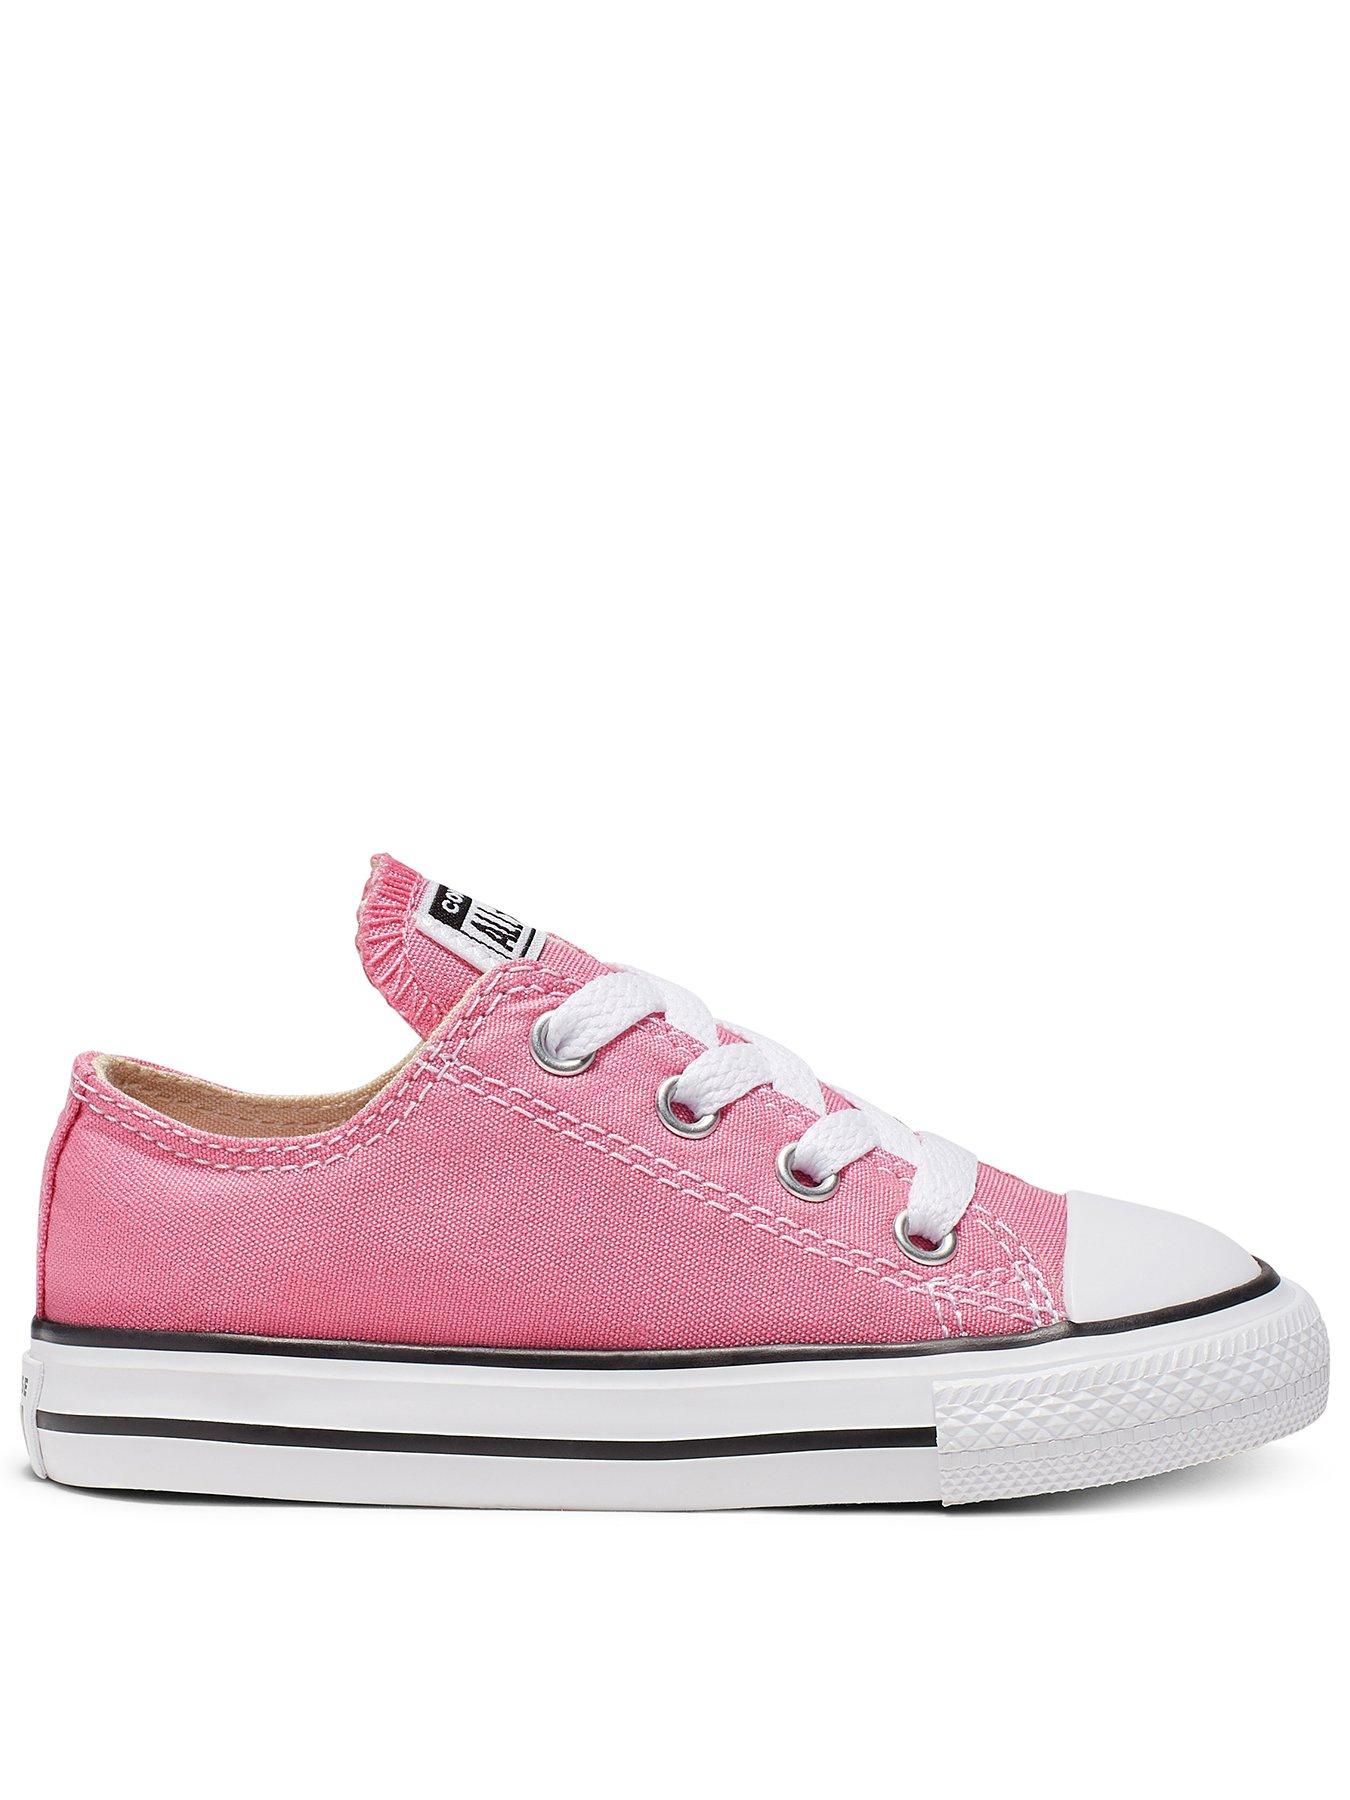 baby pink converse infant